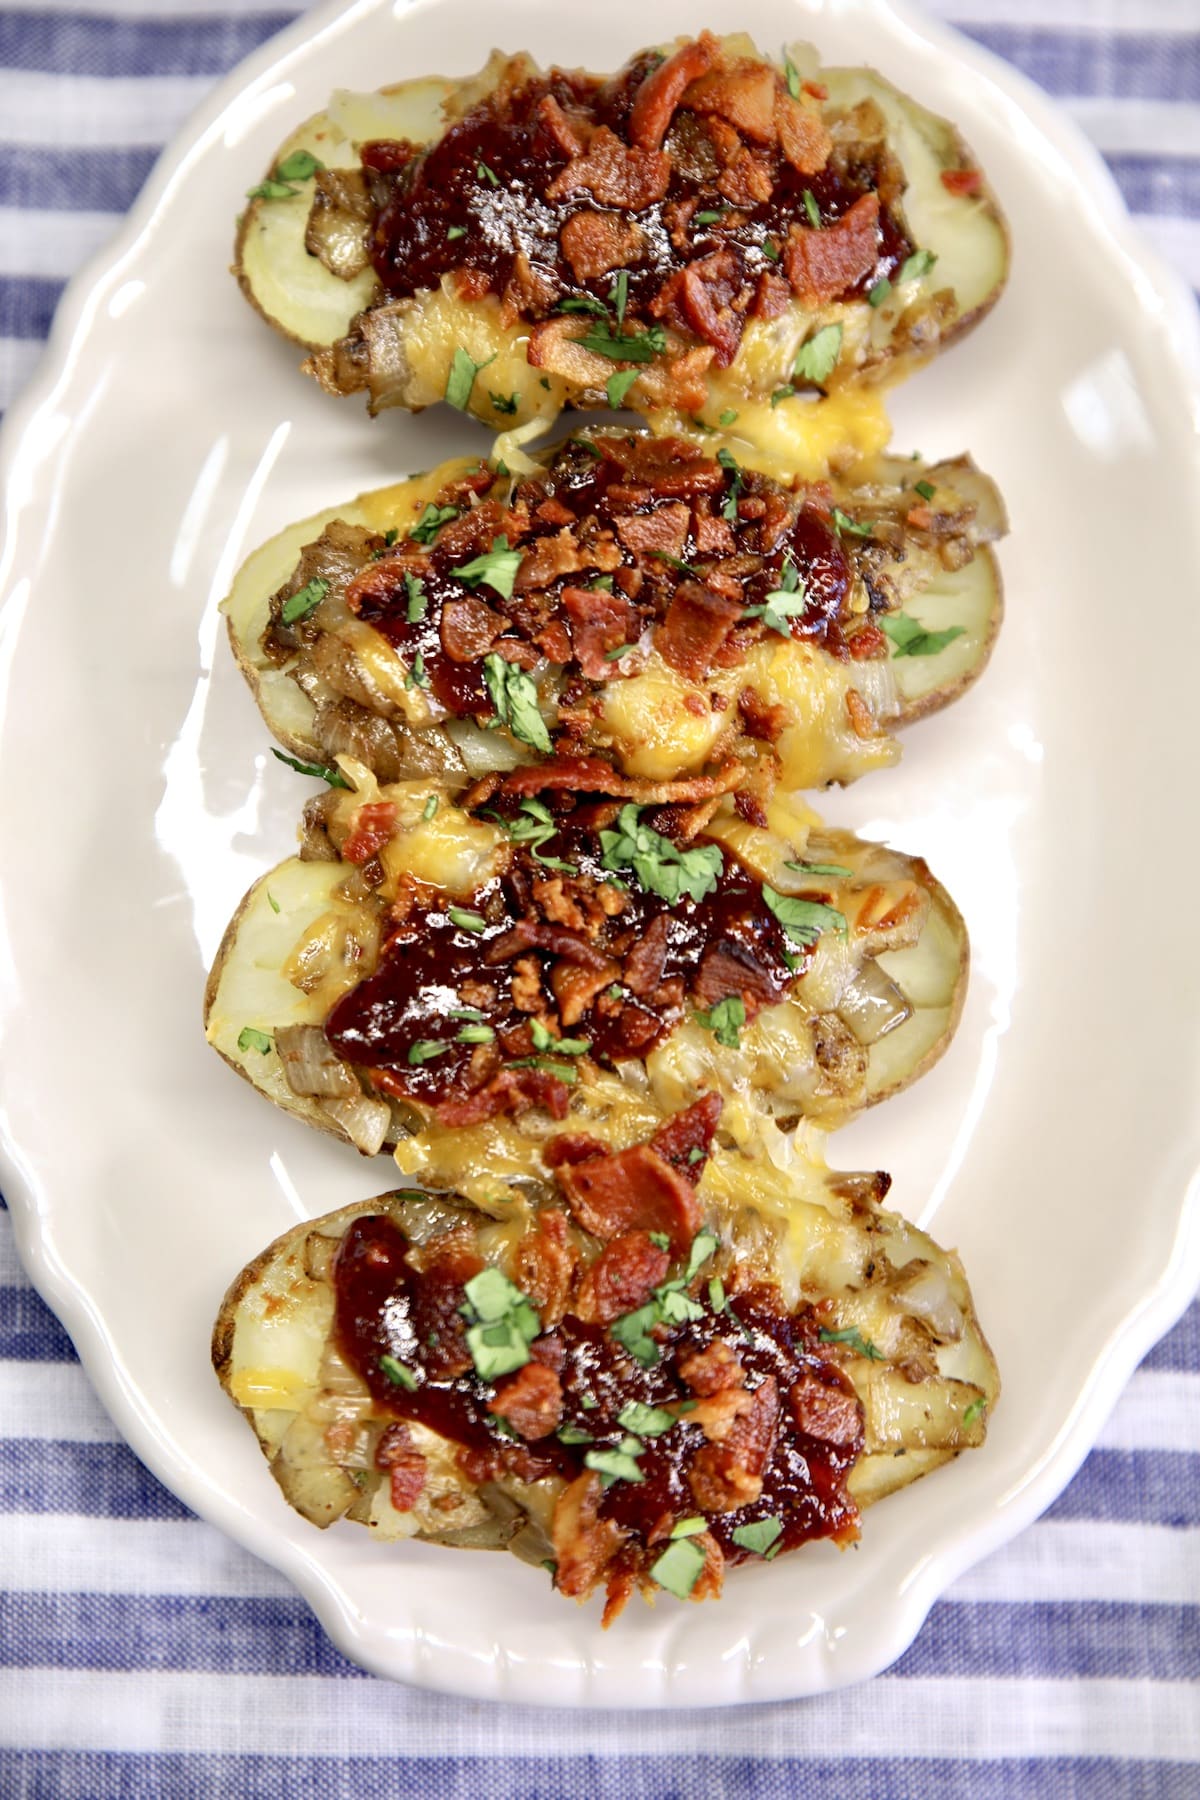 Platter of 4 baked potato halves topped with cheese, bbq sauce and bacon.